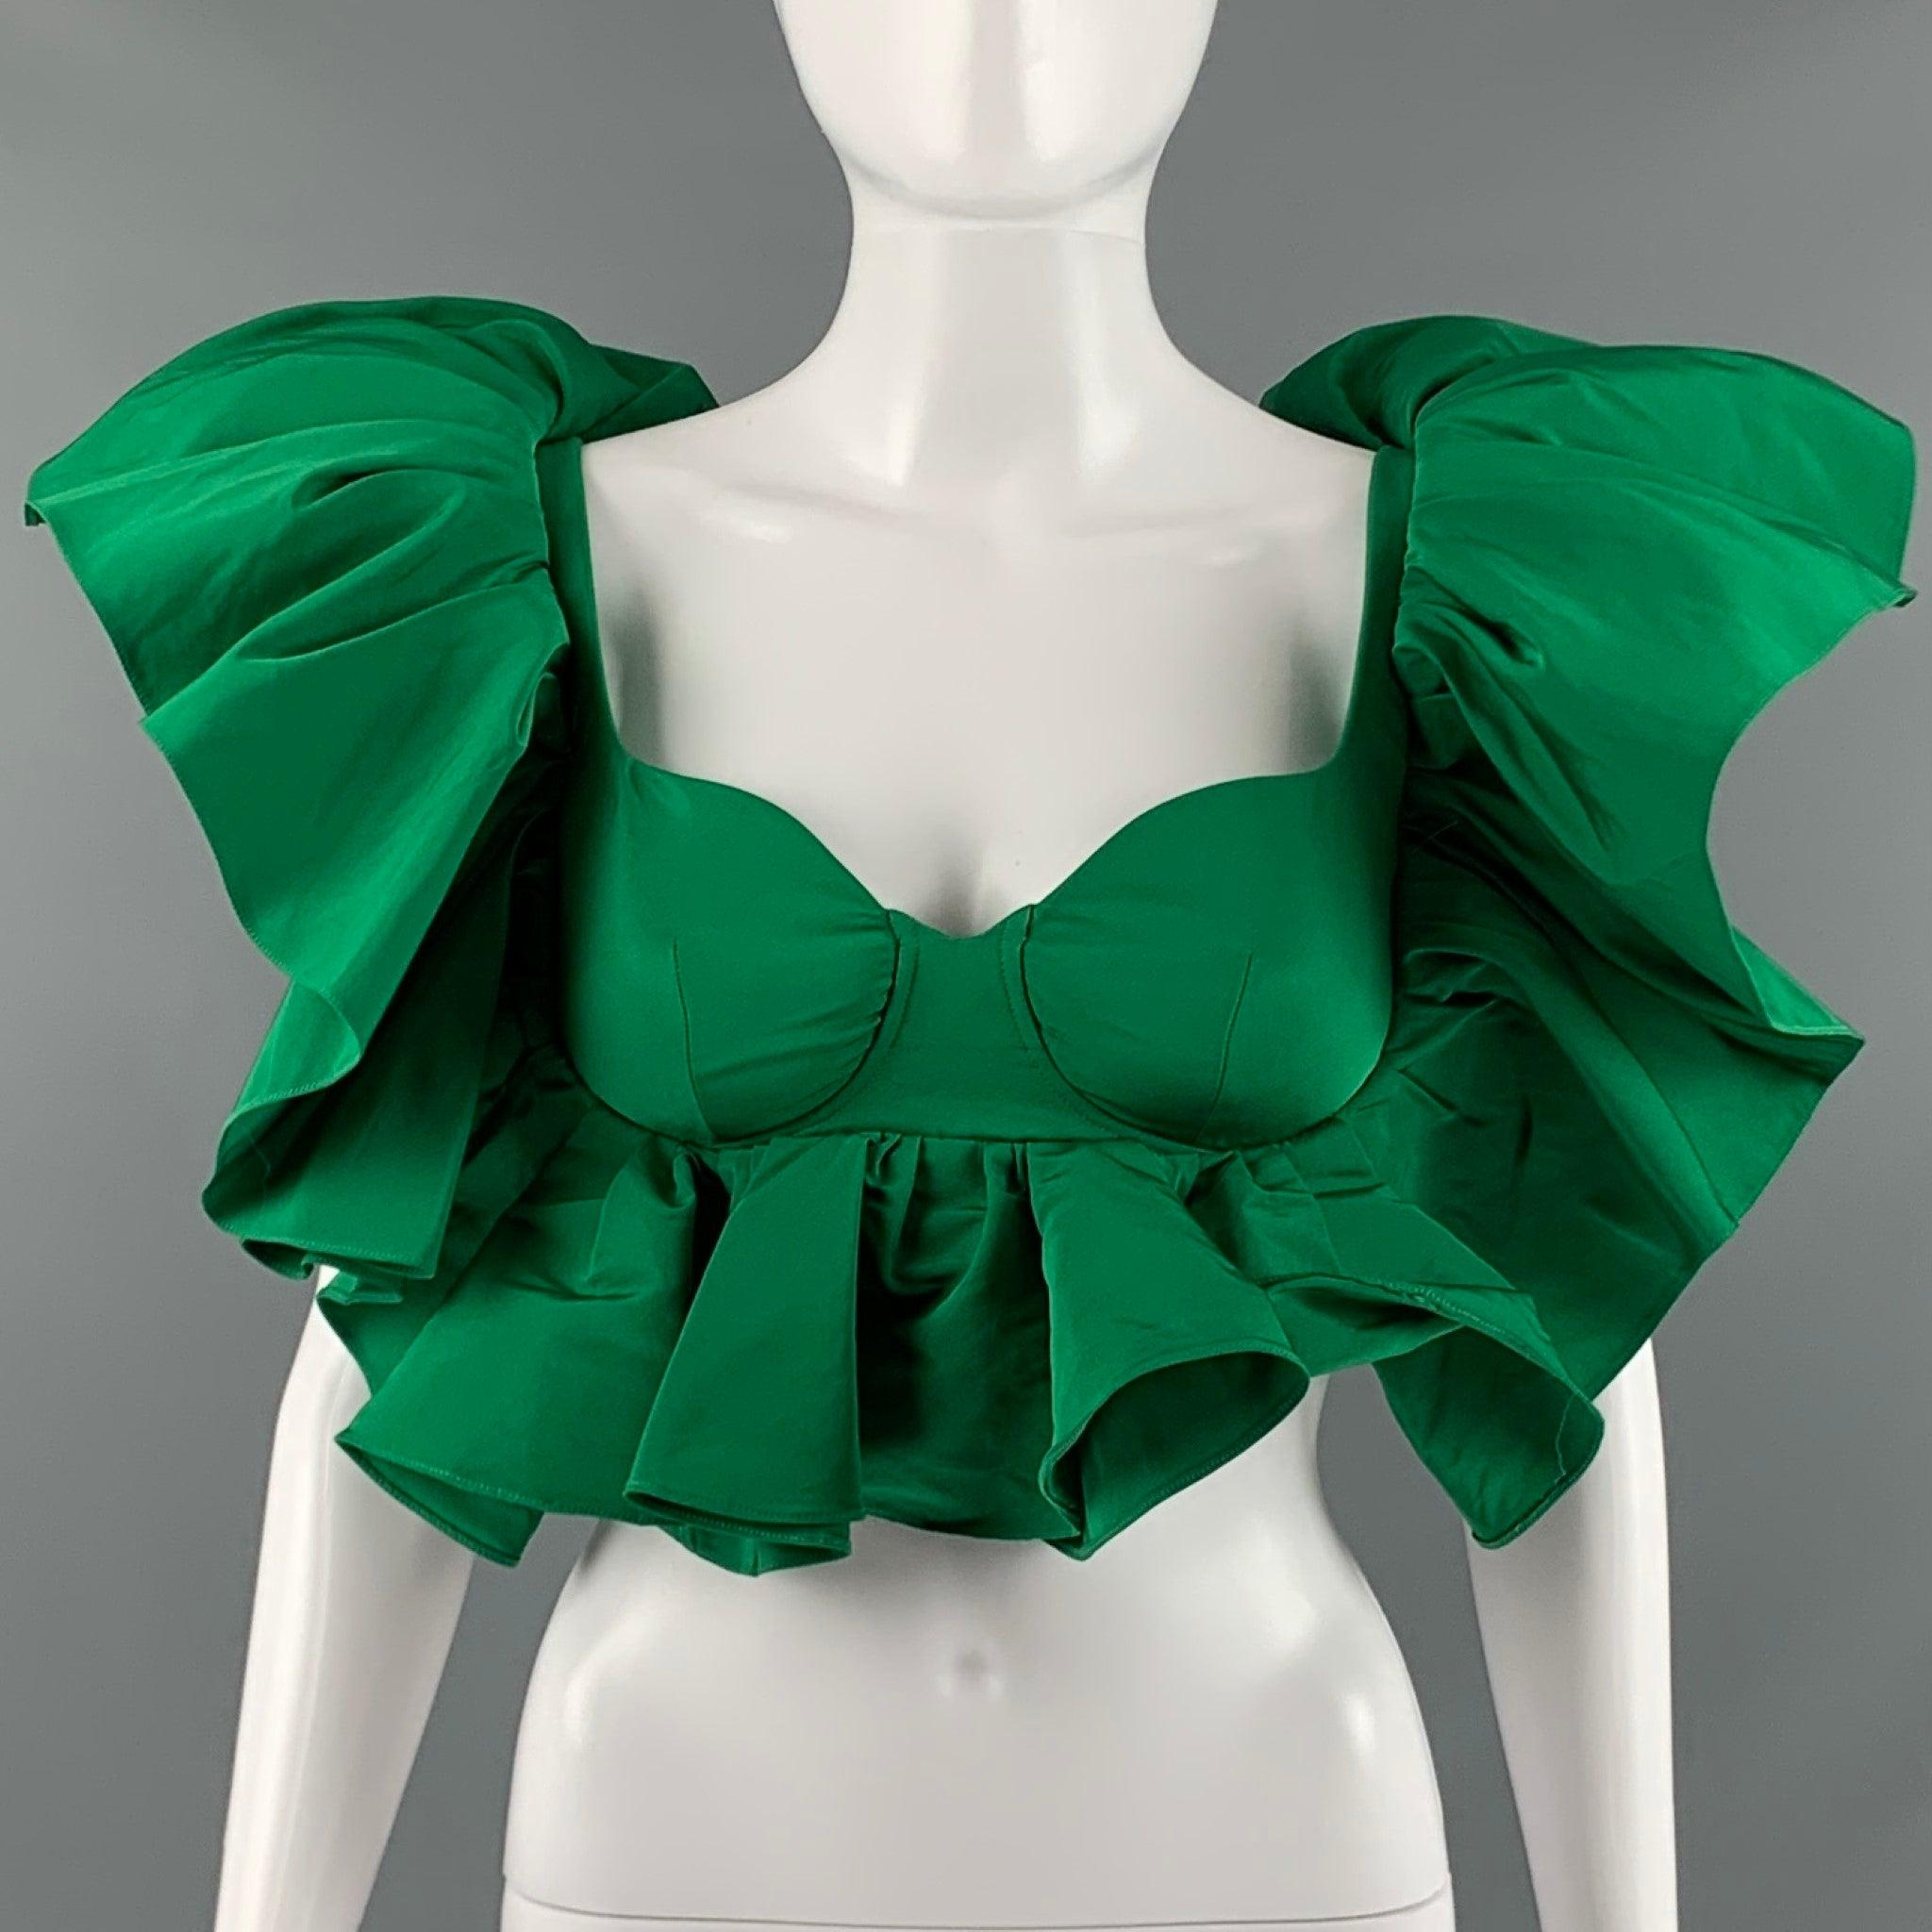 ALEXANDER MCQUEEN 2021 dress top in a vibrant green polyester fabric featuring a bustier style, opulent ruffles, and a back zipper closure. Made in Italy.Excellent Pre-Owned Condition. 

Marked:  36 

Measurements: 
 
Shoulder: 13 inches Bust: 26